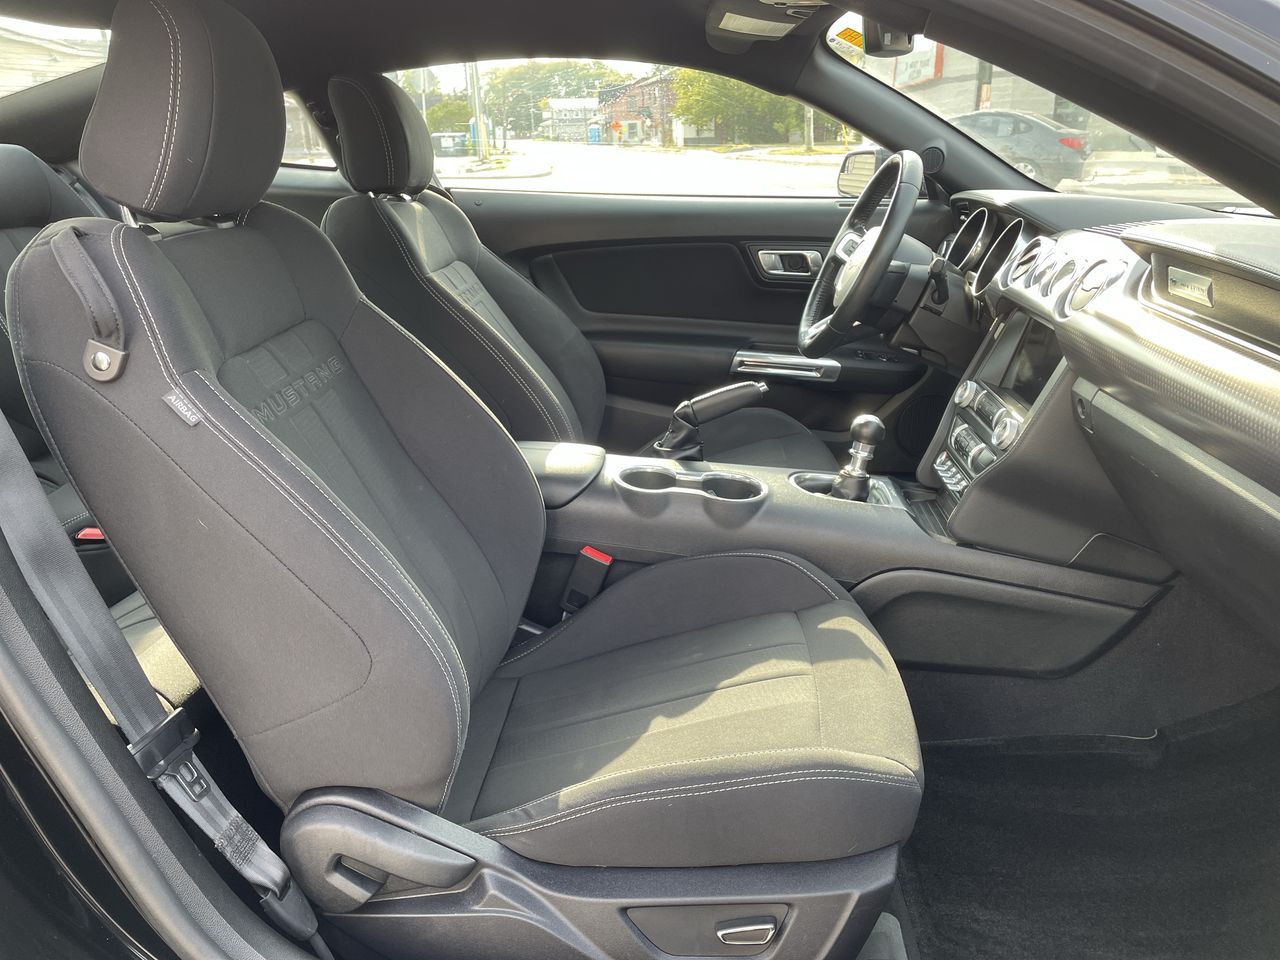 2019 Ford Mustang - P21400 Full Image 23